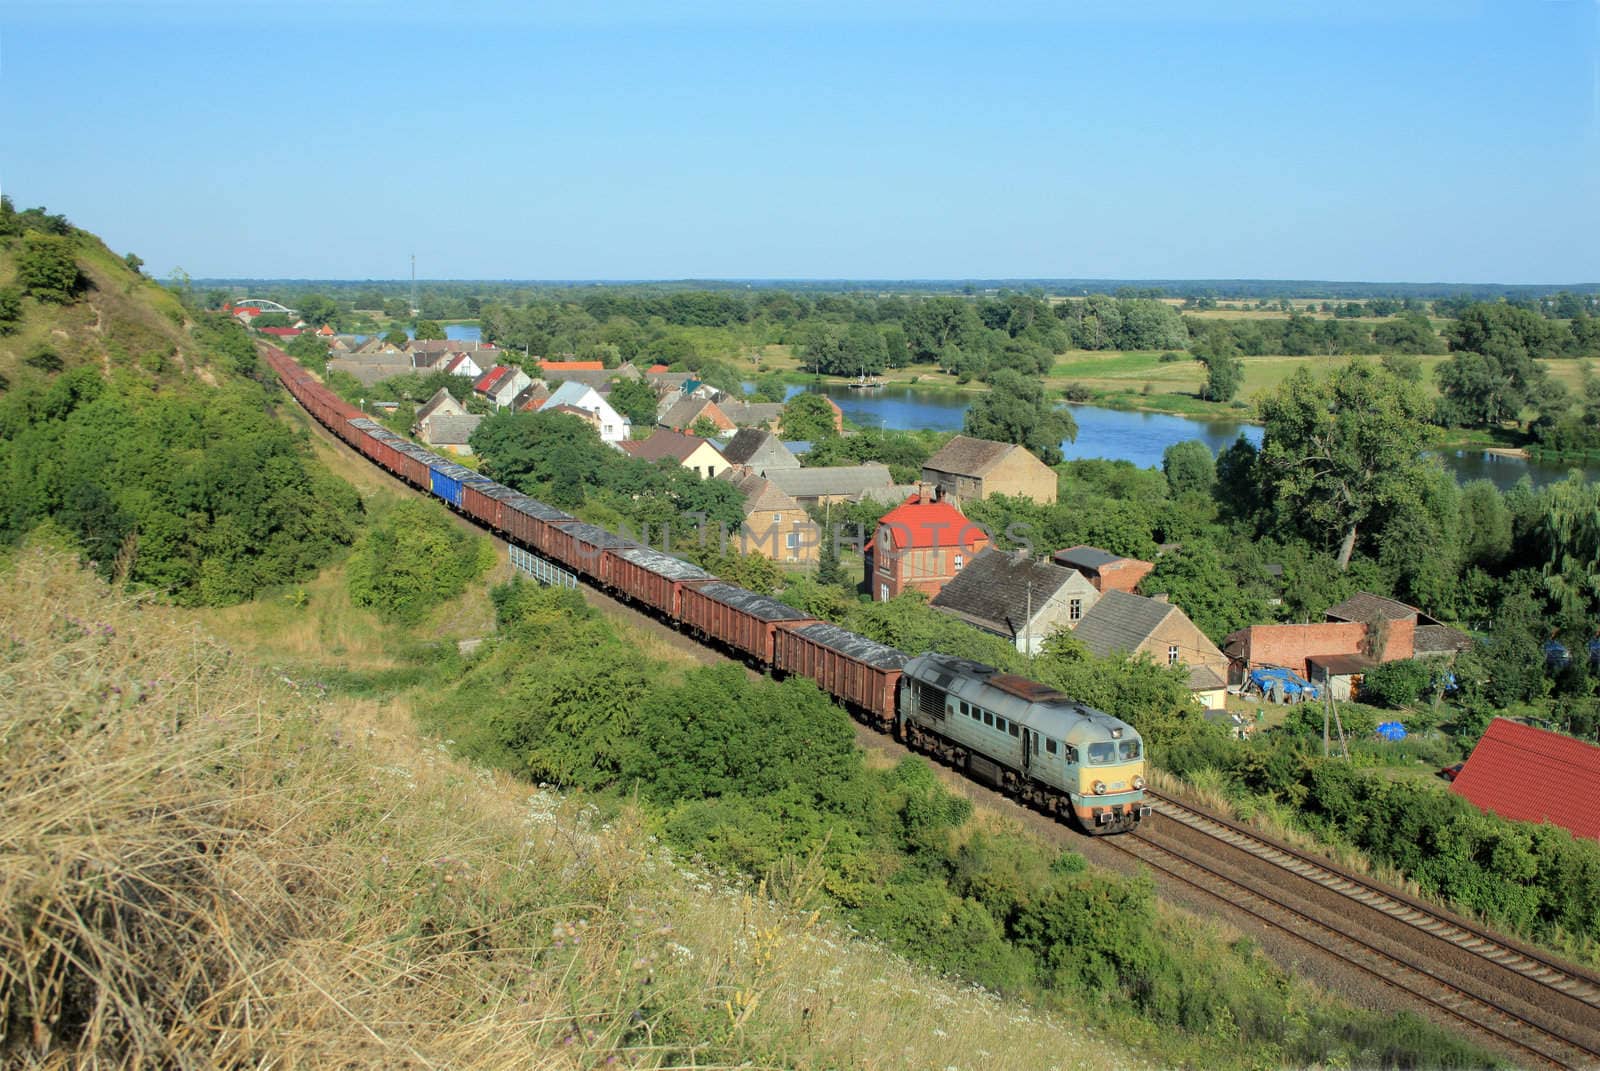 Freight train passing the village with the river in background
